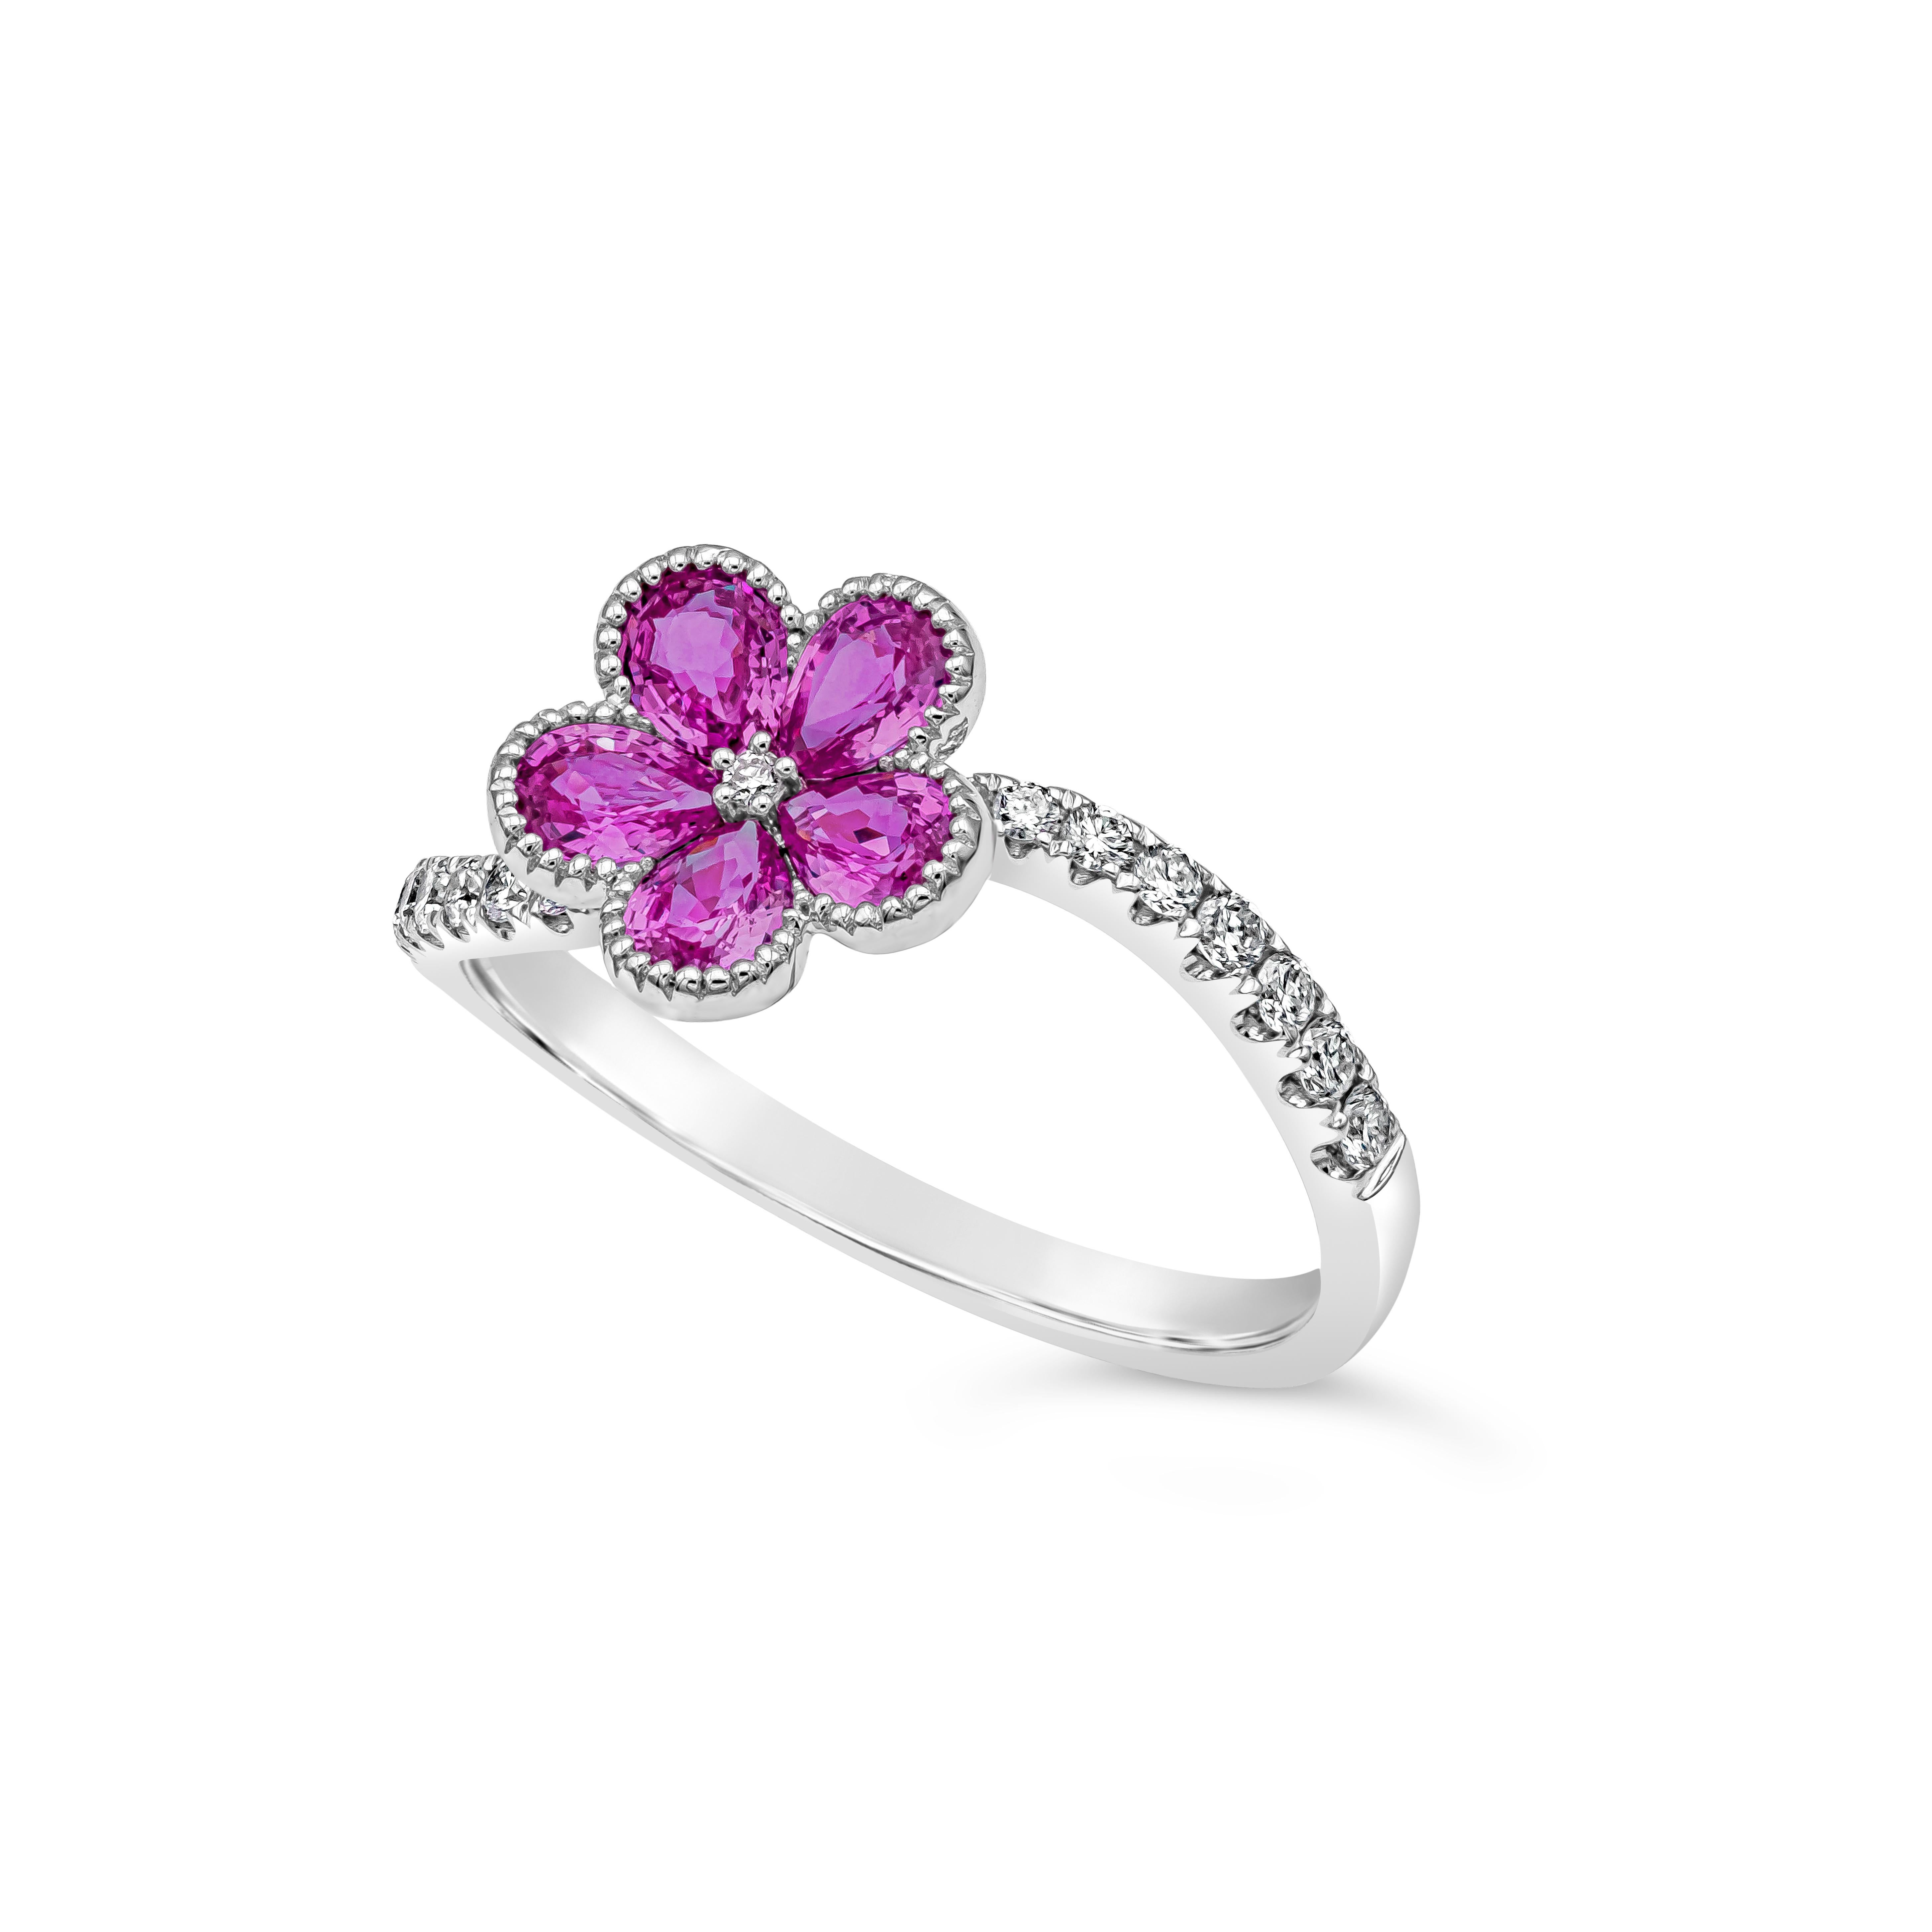 Showcasing a color-rich cluster of five pear shape pink sapphire weighing 0.86 carats total forming a beautiful flower design. Accented with 17 round brilliant diamonds that continues on to the shank of the ring weighing 0.20 carats total, F-G